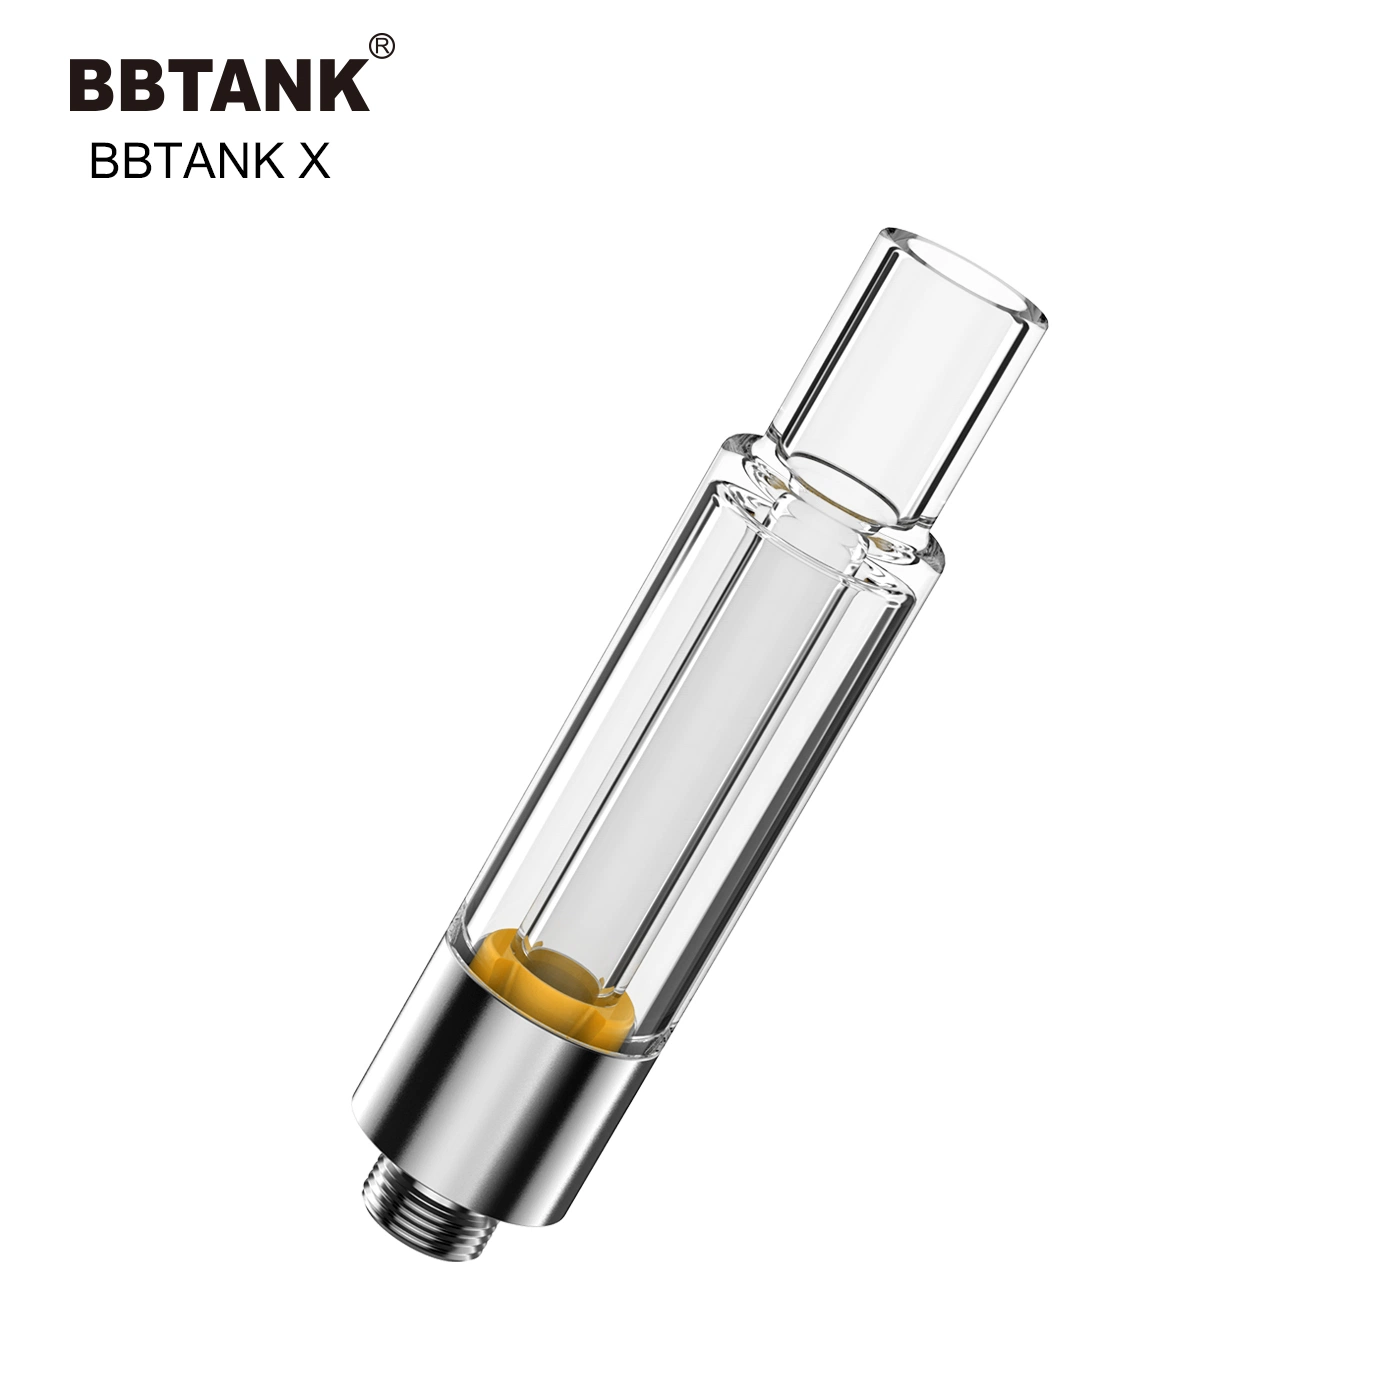 All-Glass Carts Suitable for D8 D9 Live Resin Bbtank All-Glass Cartridge Empty Atomizer Thch Thcb 1g 2g 3G